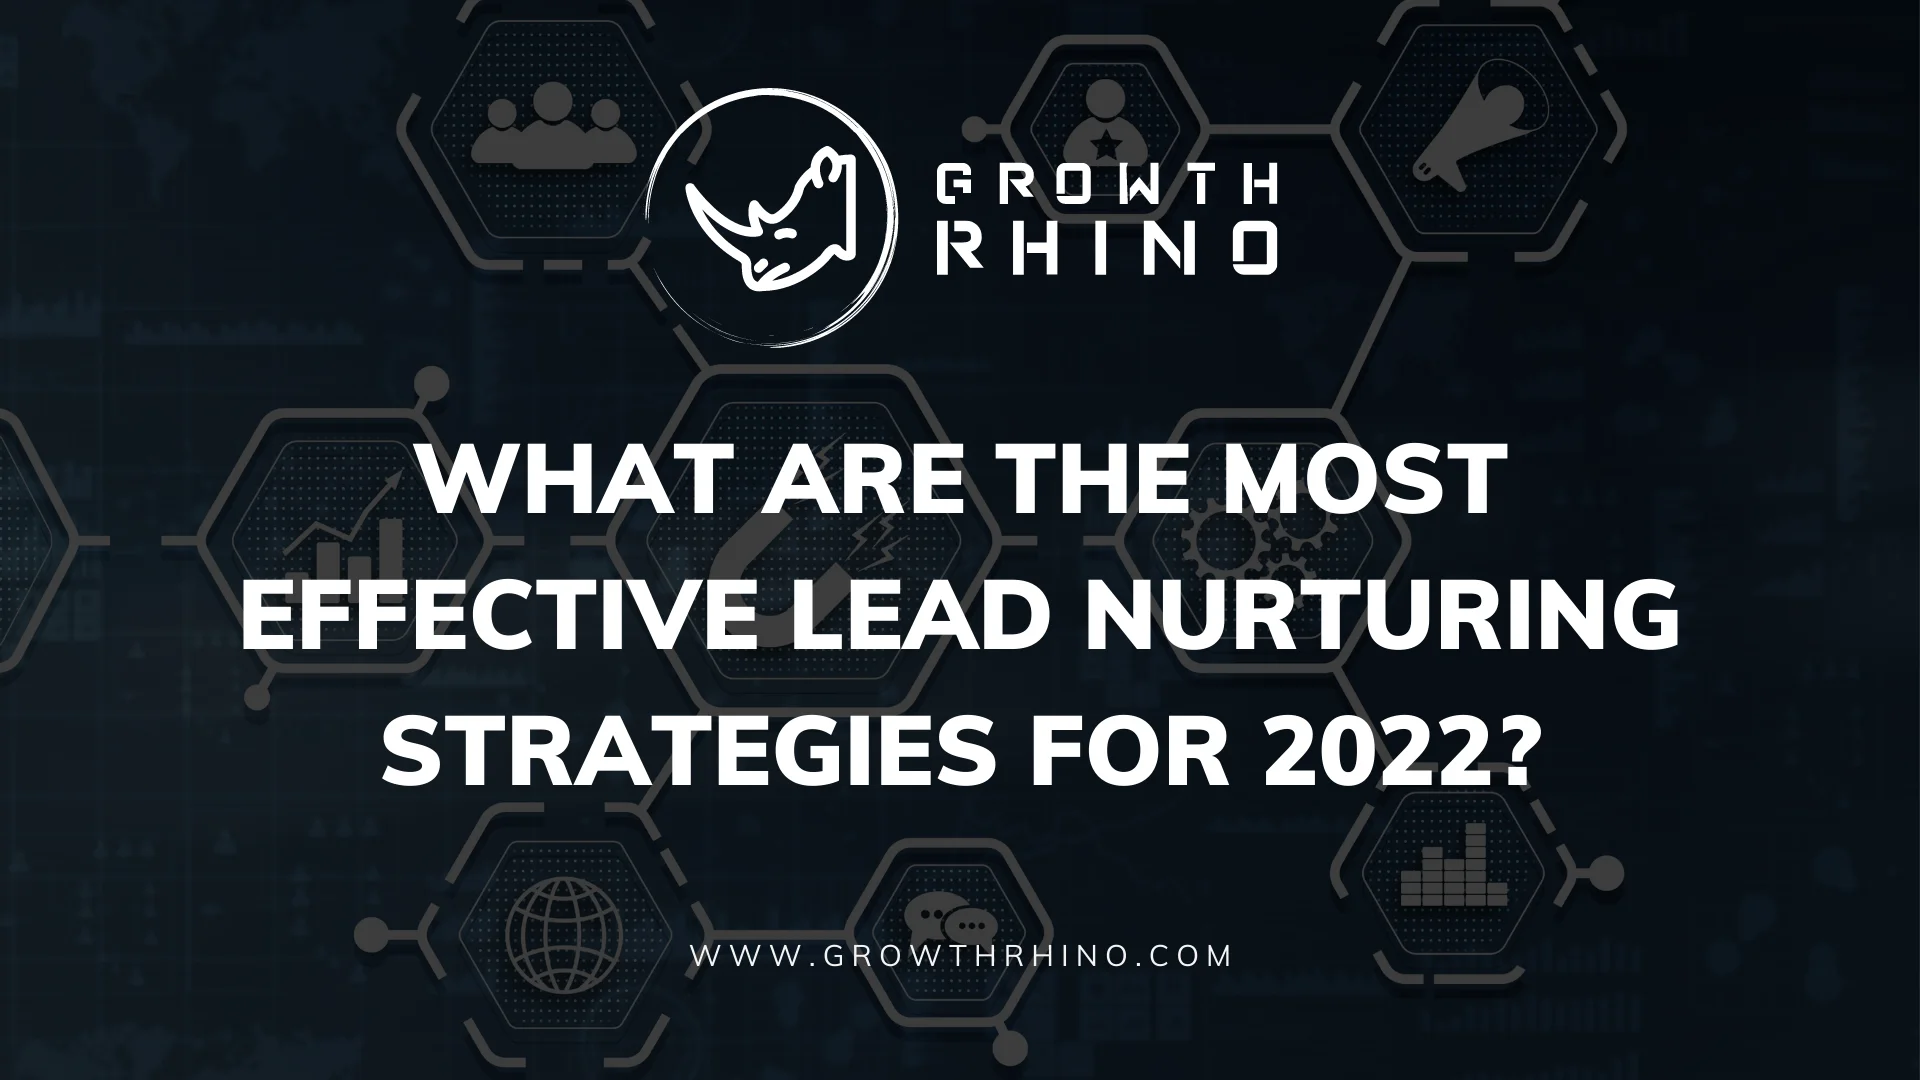 What are the Most Effective Lead Nurturing Strategies for 2022?